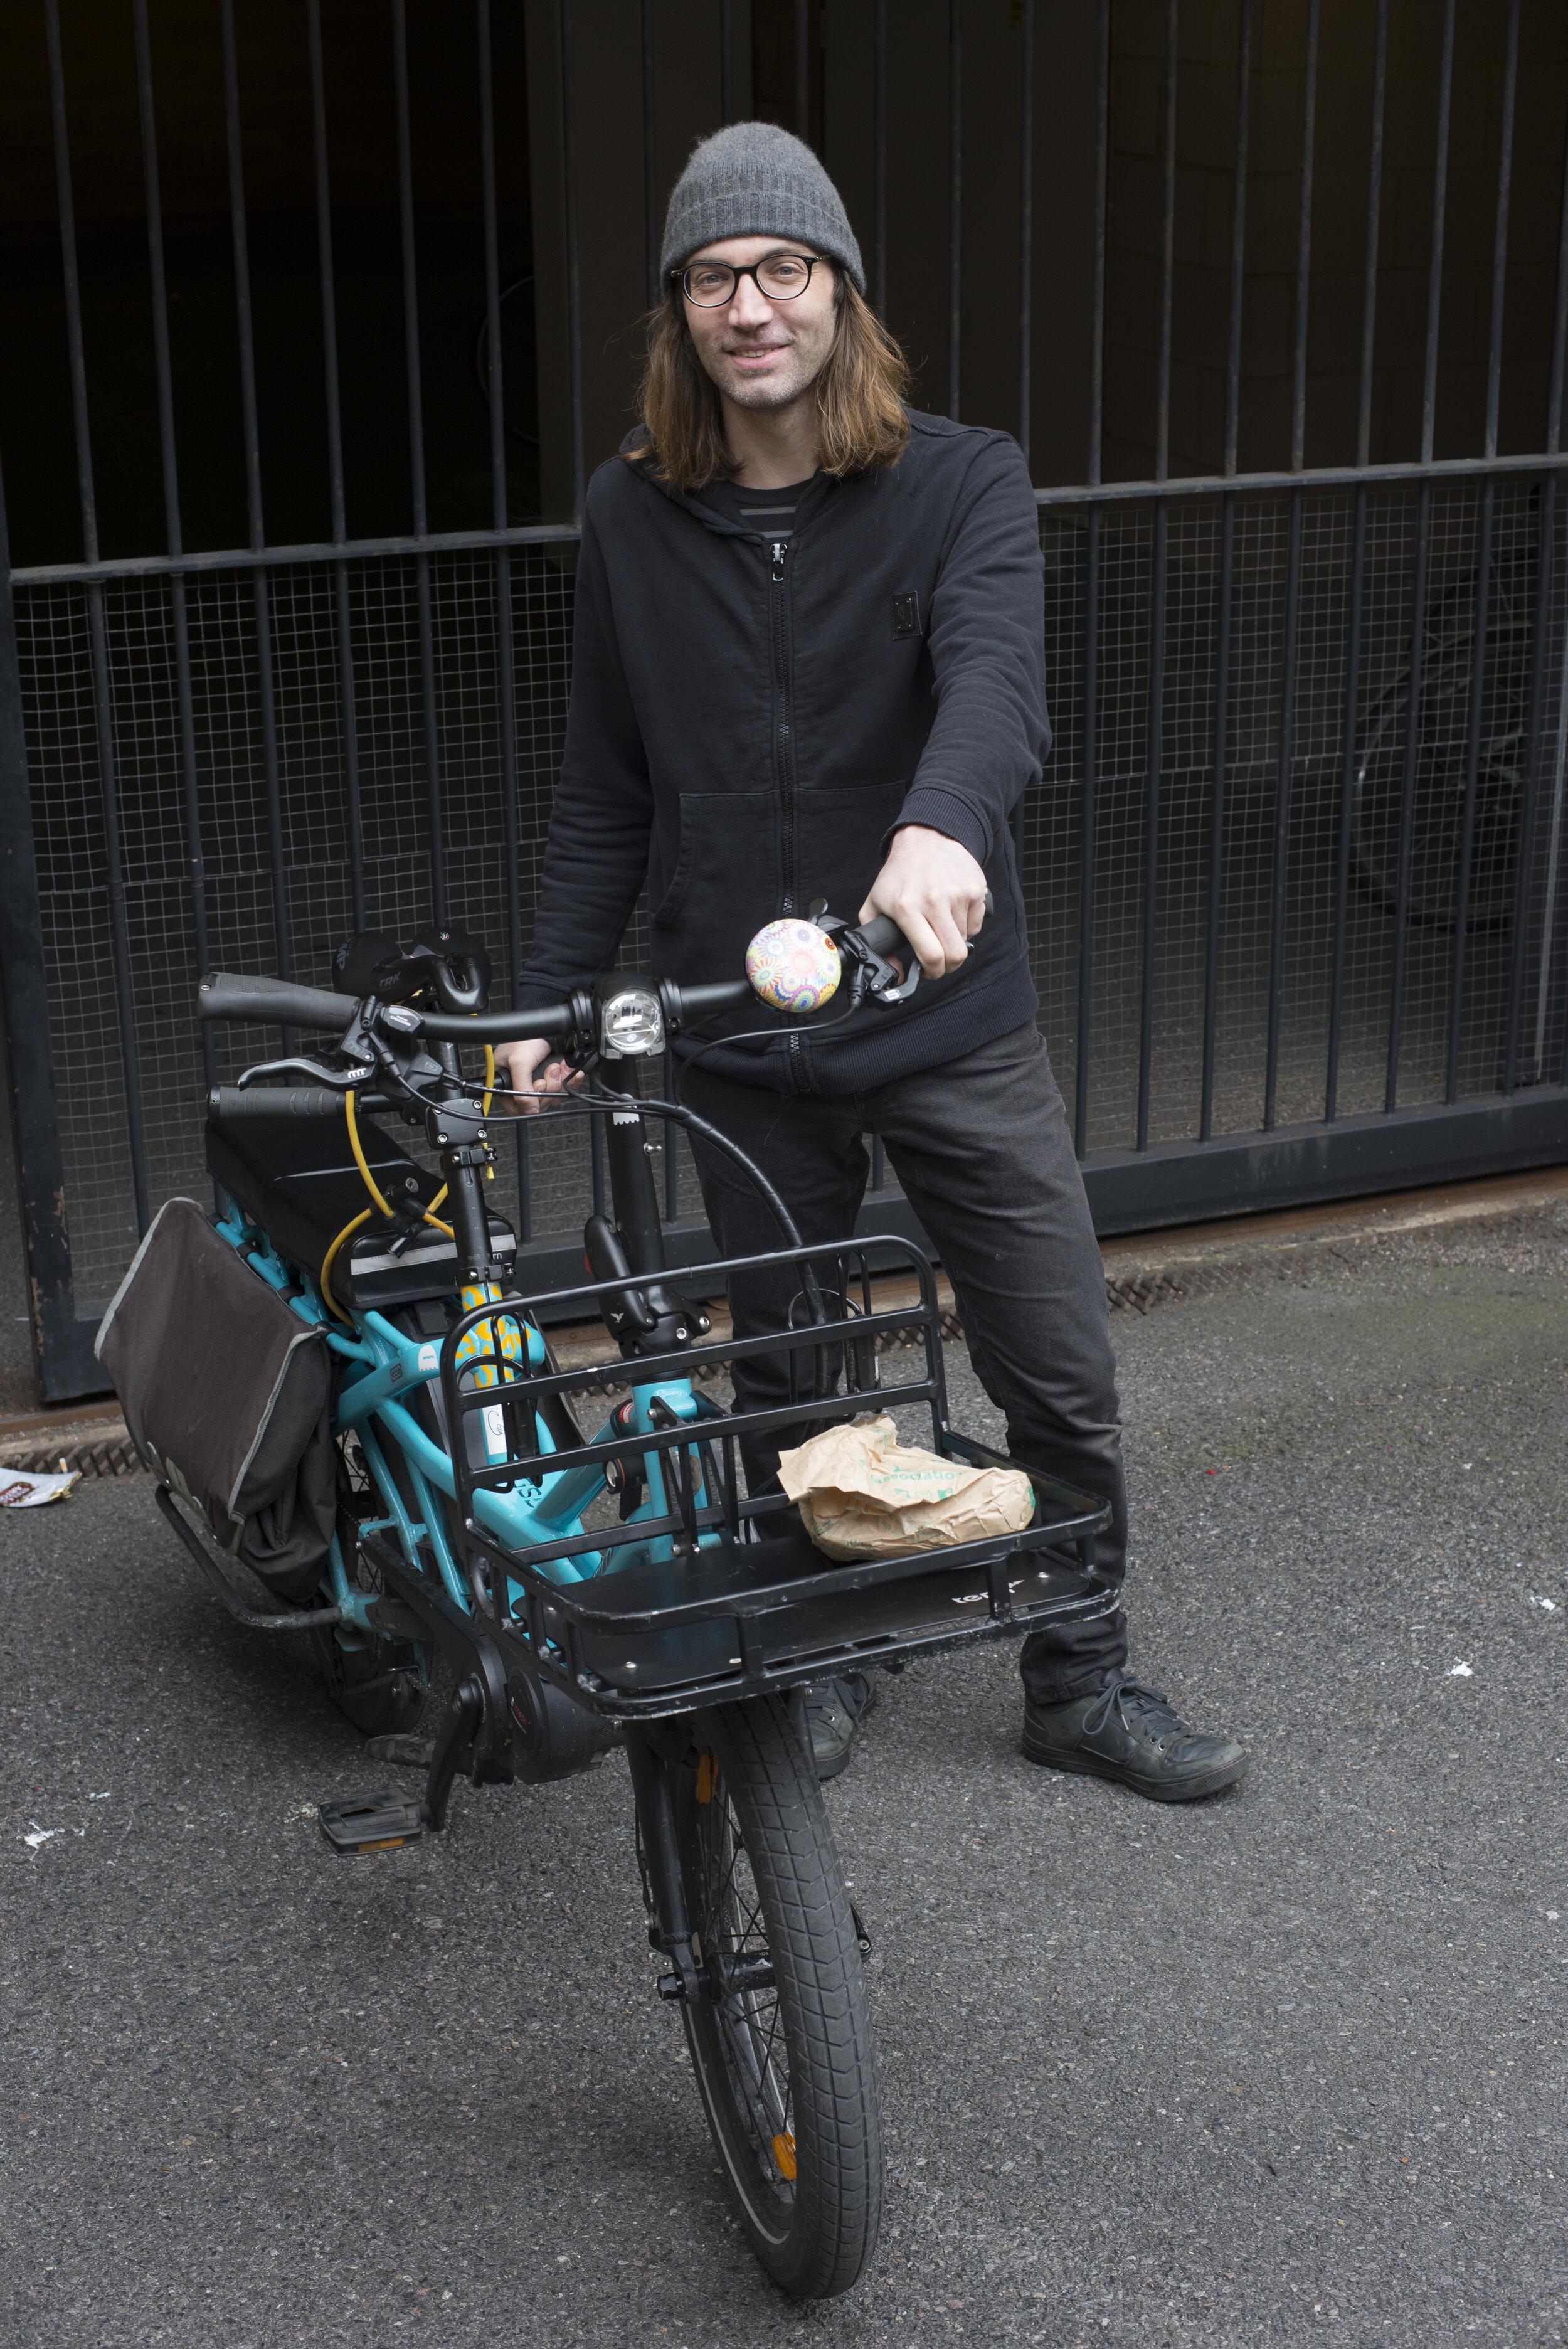  James Holloway, with his Tern GSD Cargo bike, used for food deliveries for Made In hackney.  cyclelondon.org   Cycle Skills, Bike Maintenance, Community Cycling, Consultancy. 